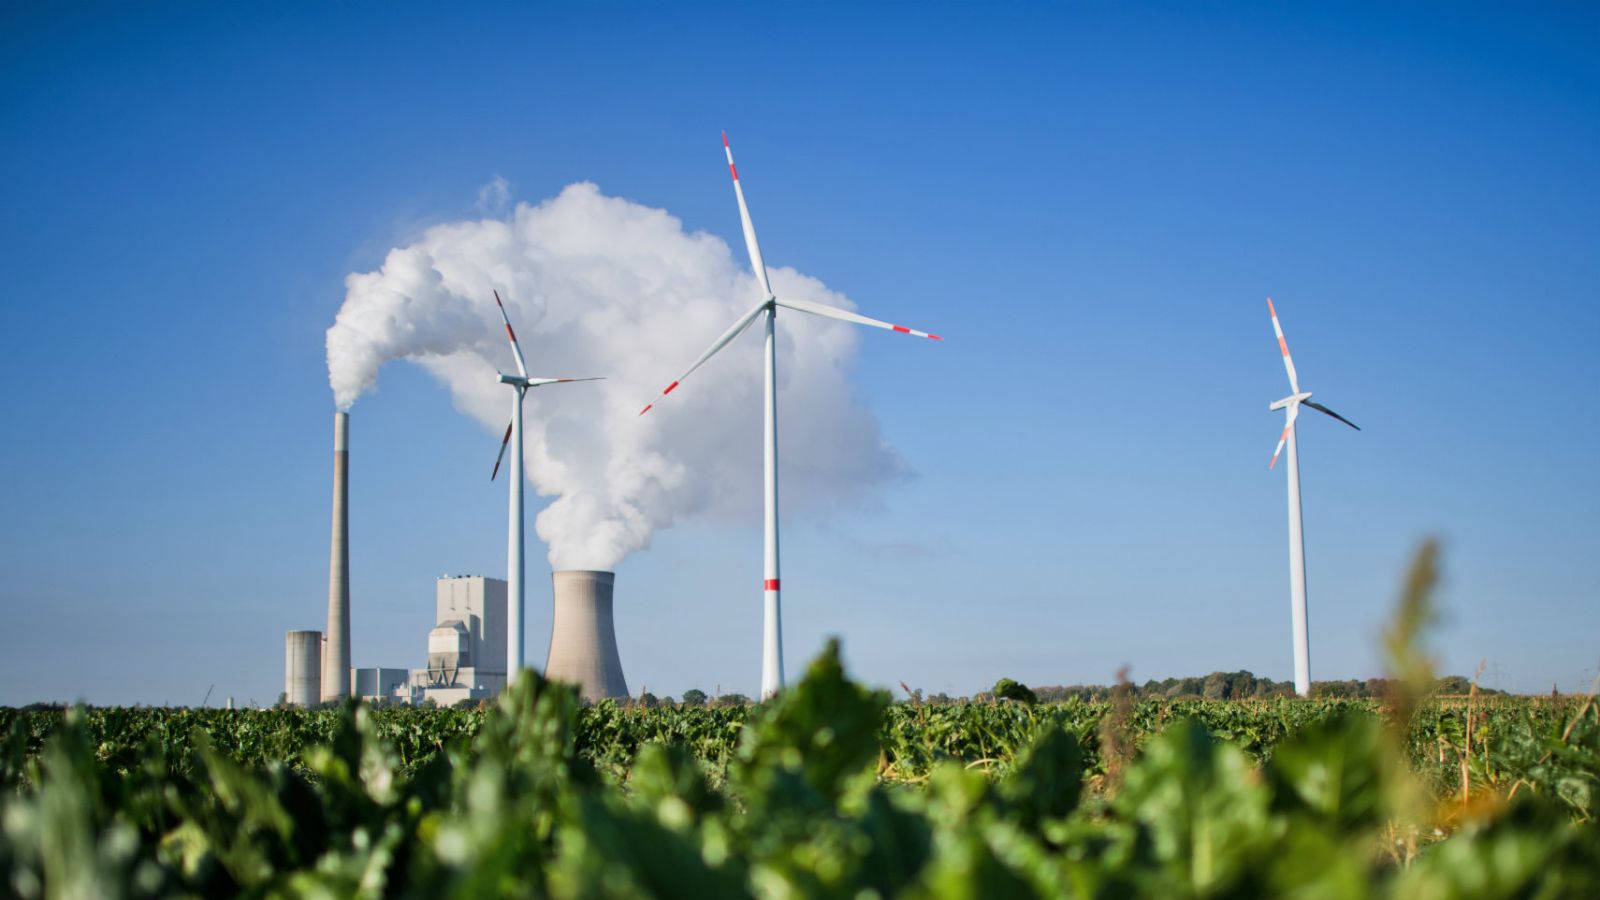 A Chinese company is offering free training for US coal miners to become wind farmers